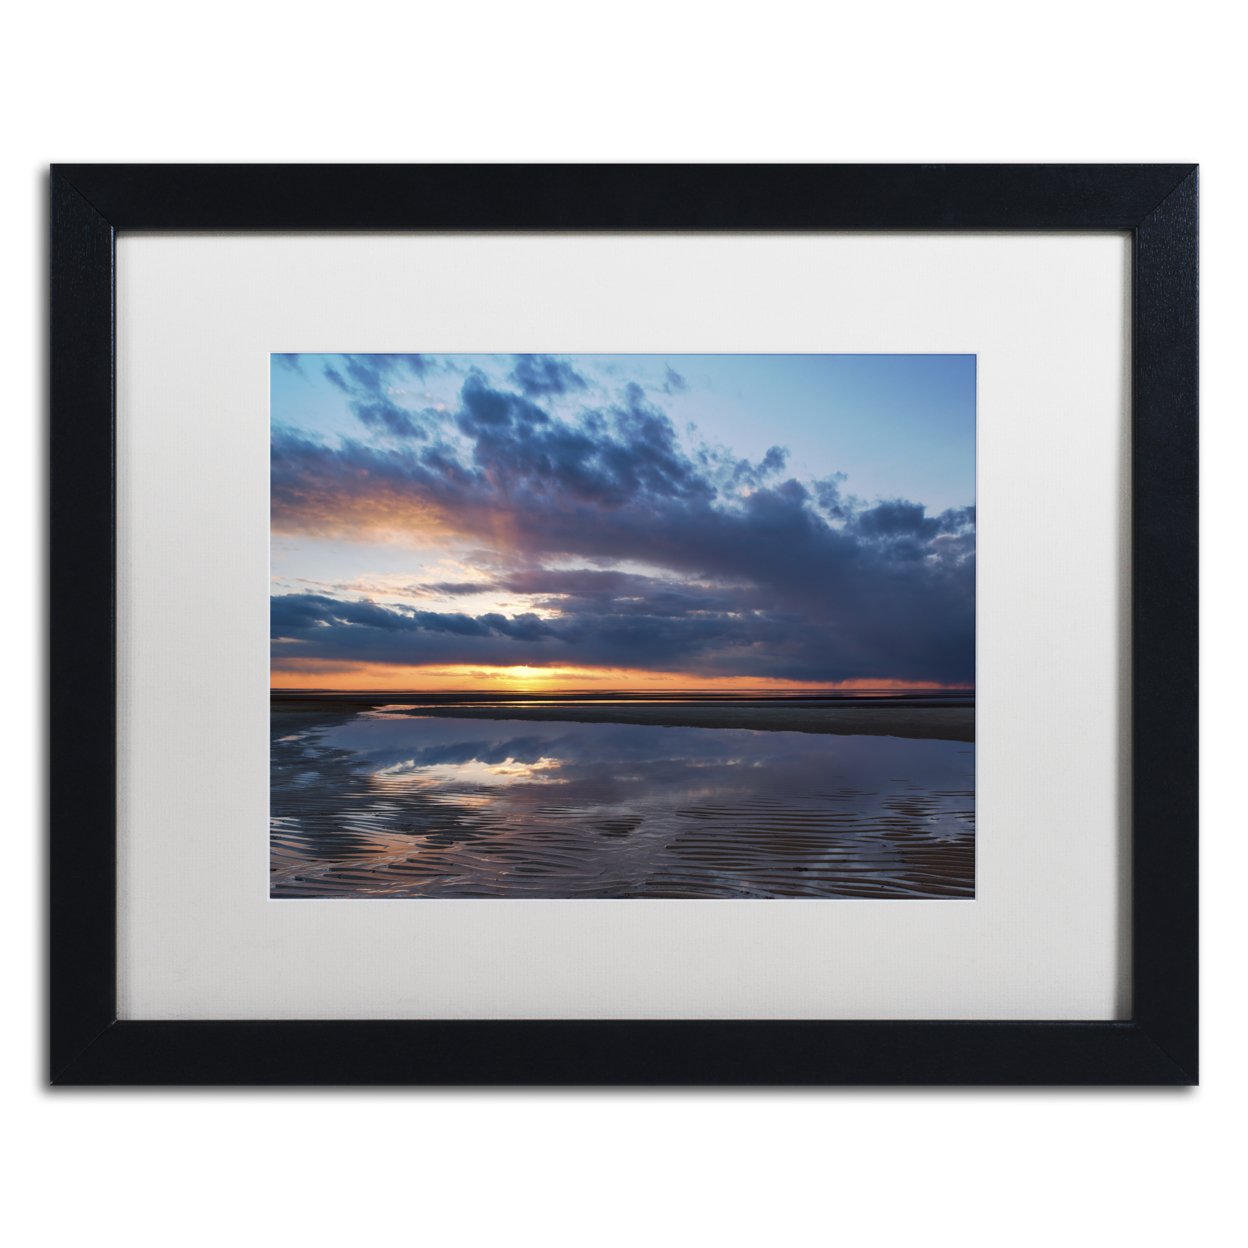 Michael Blanchette Photography 'Ripples And Fluff' Black Wooden Framed Art 18 X 22 Inches